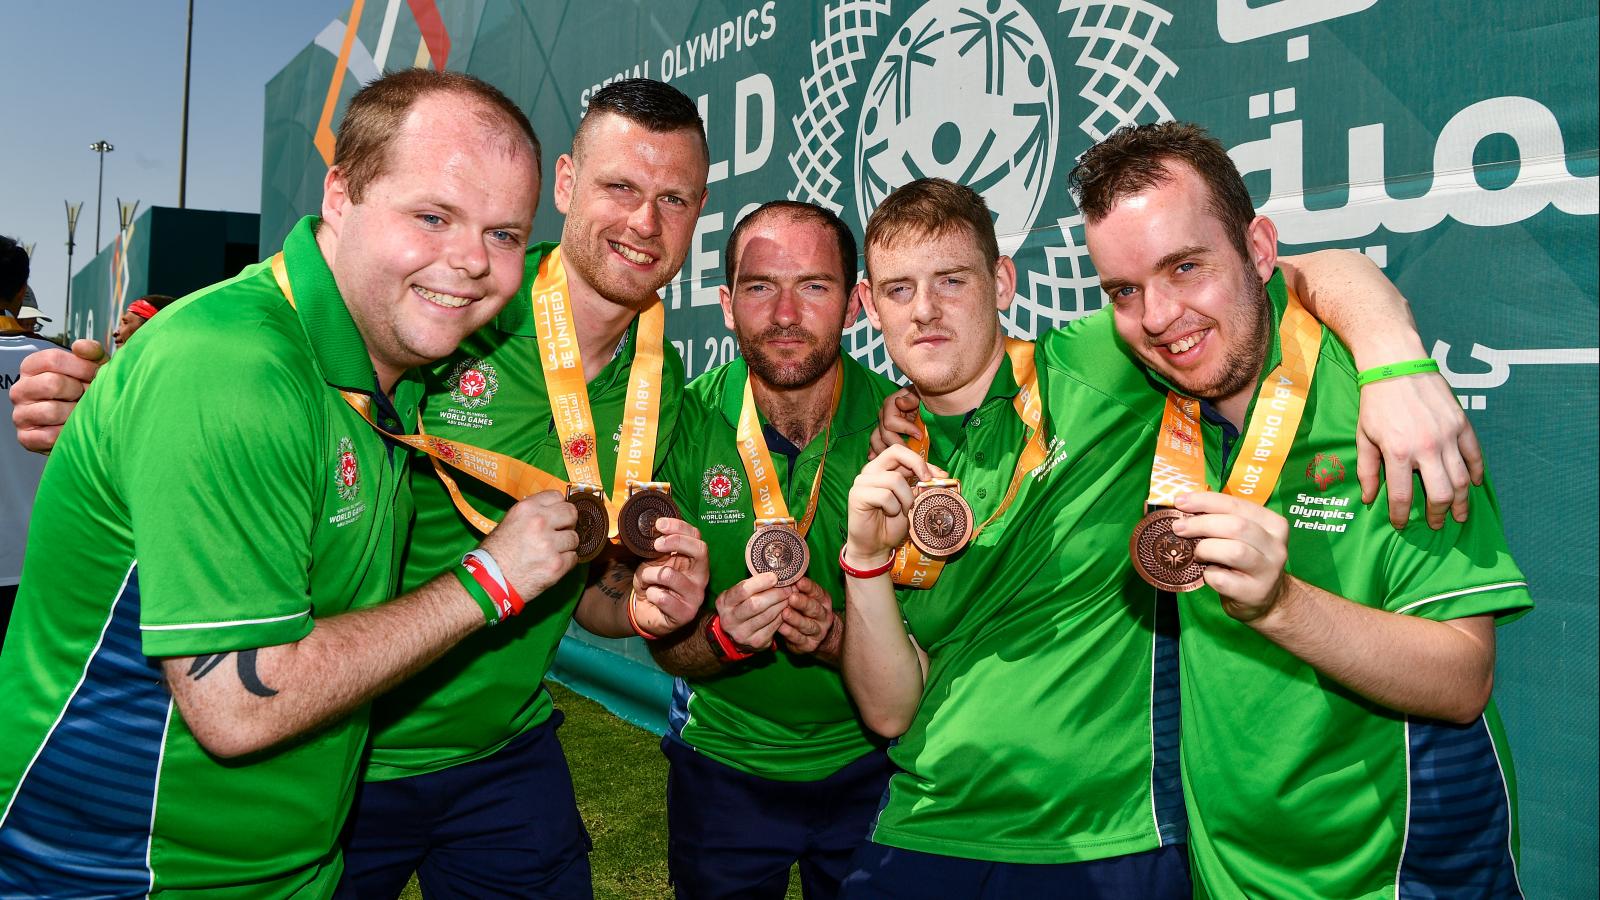 Members of Special Olympics Ireland team holding up medals in celebration